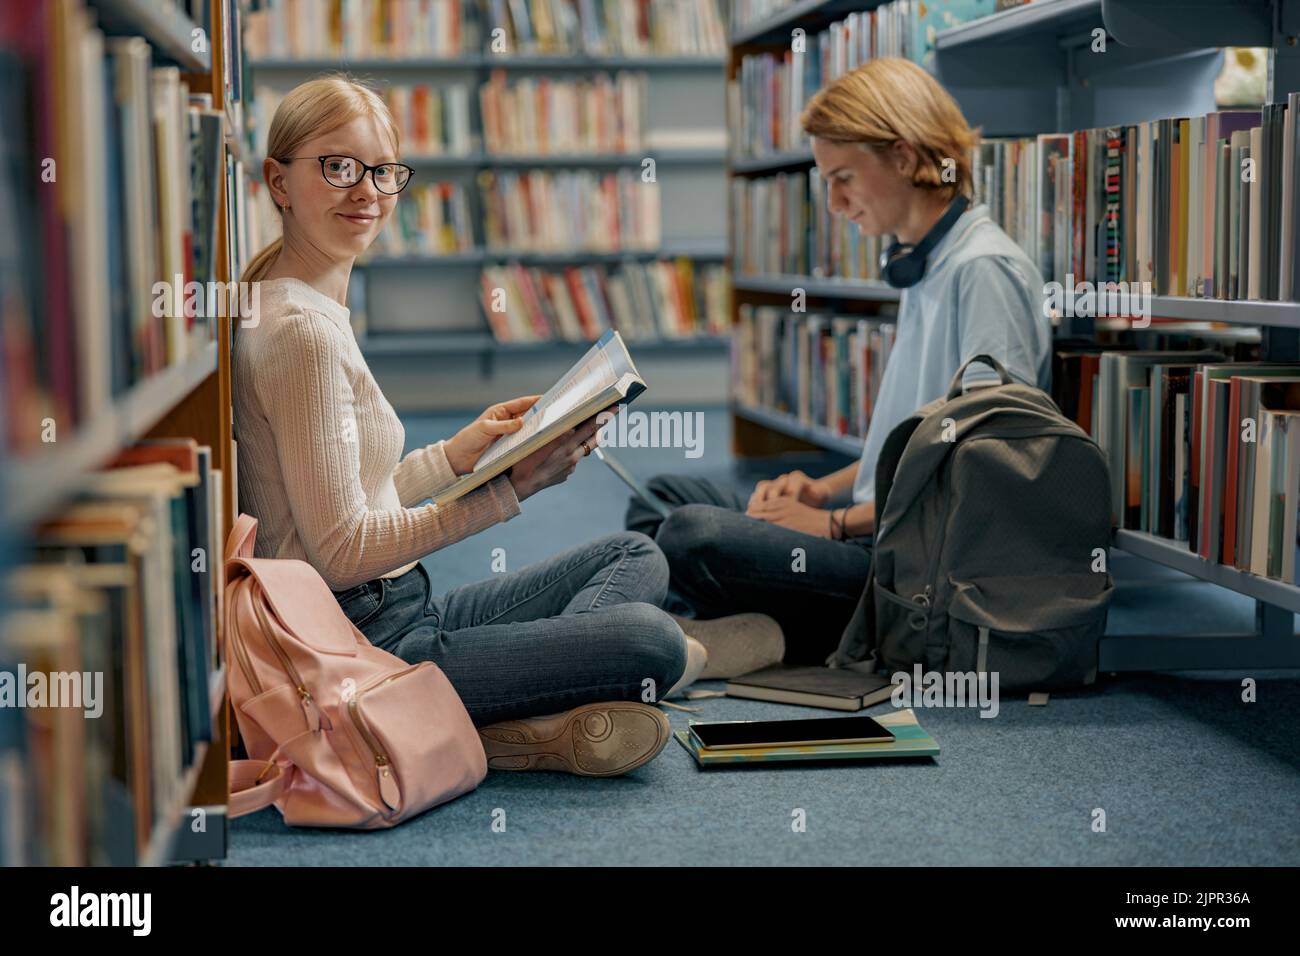 Friends student sit on floor near bookshelves in library and studying. Prepearing for exam Stock Photo